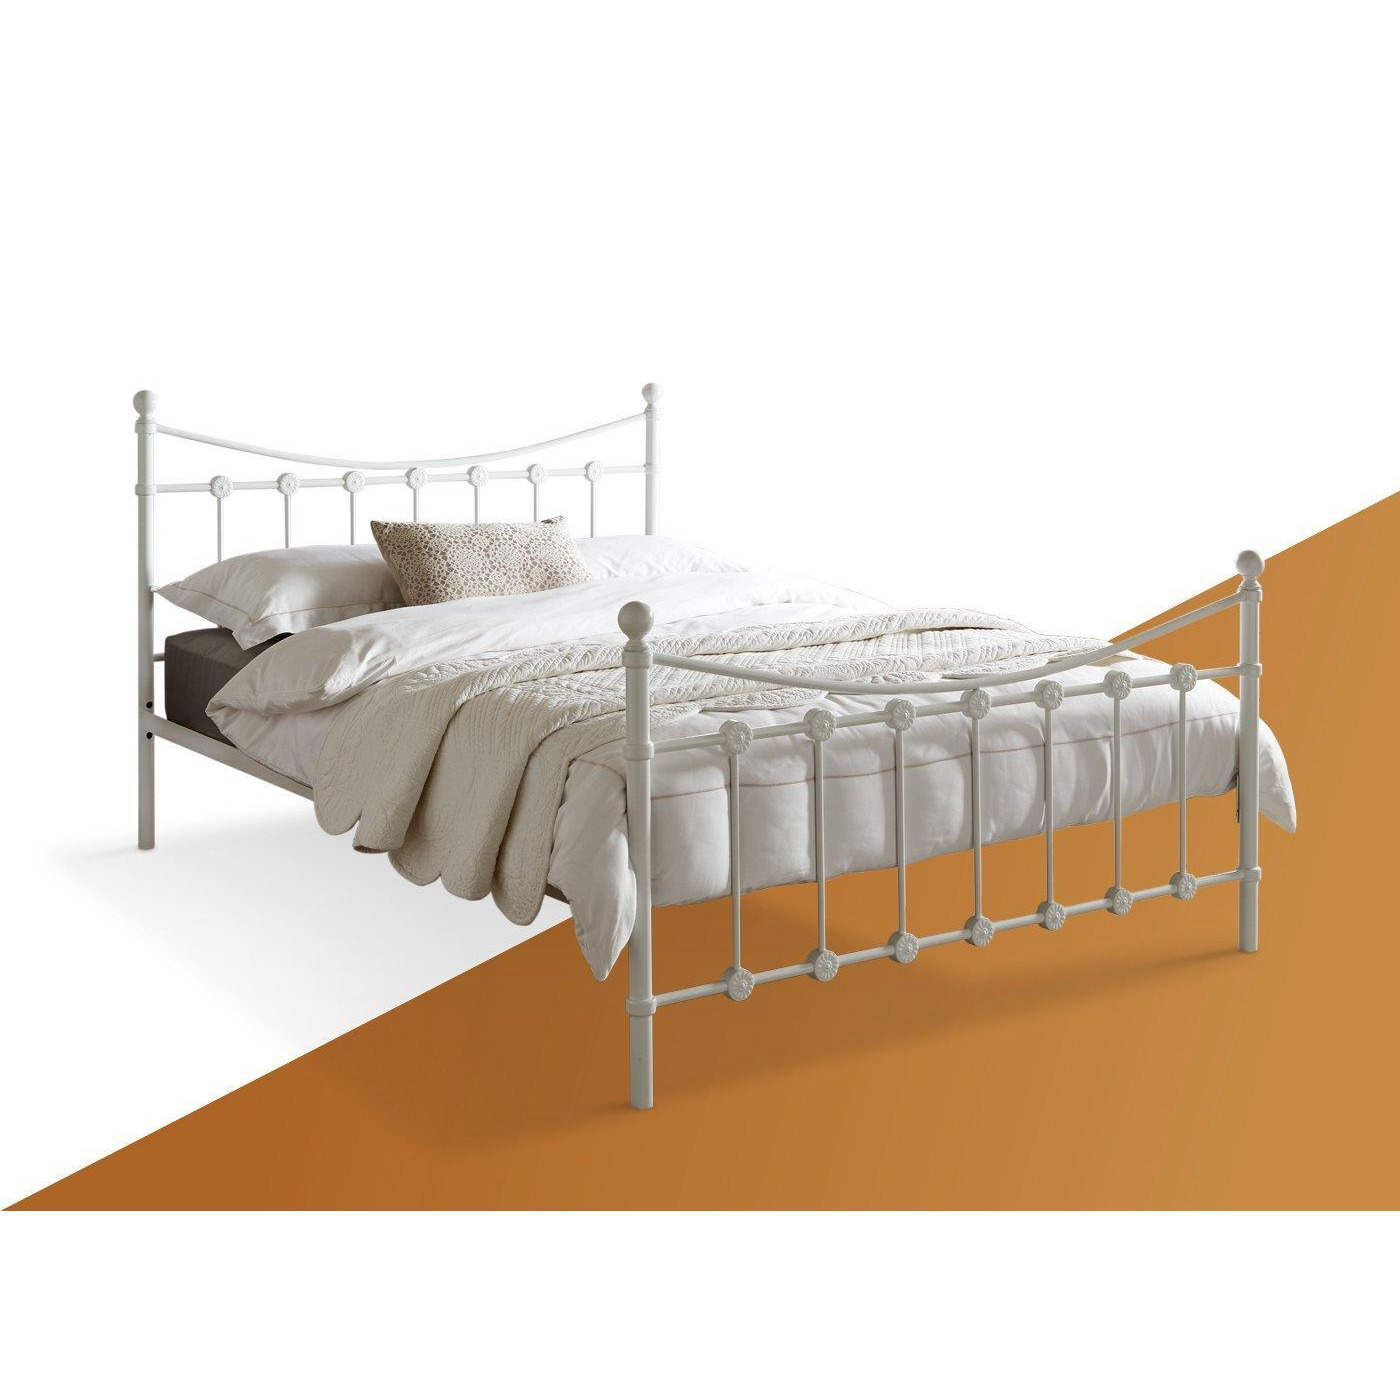 Ava Metal Bed Frame - 4'6 Double - White